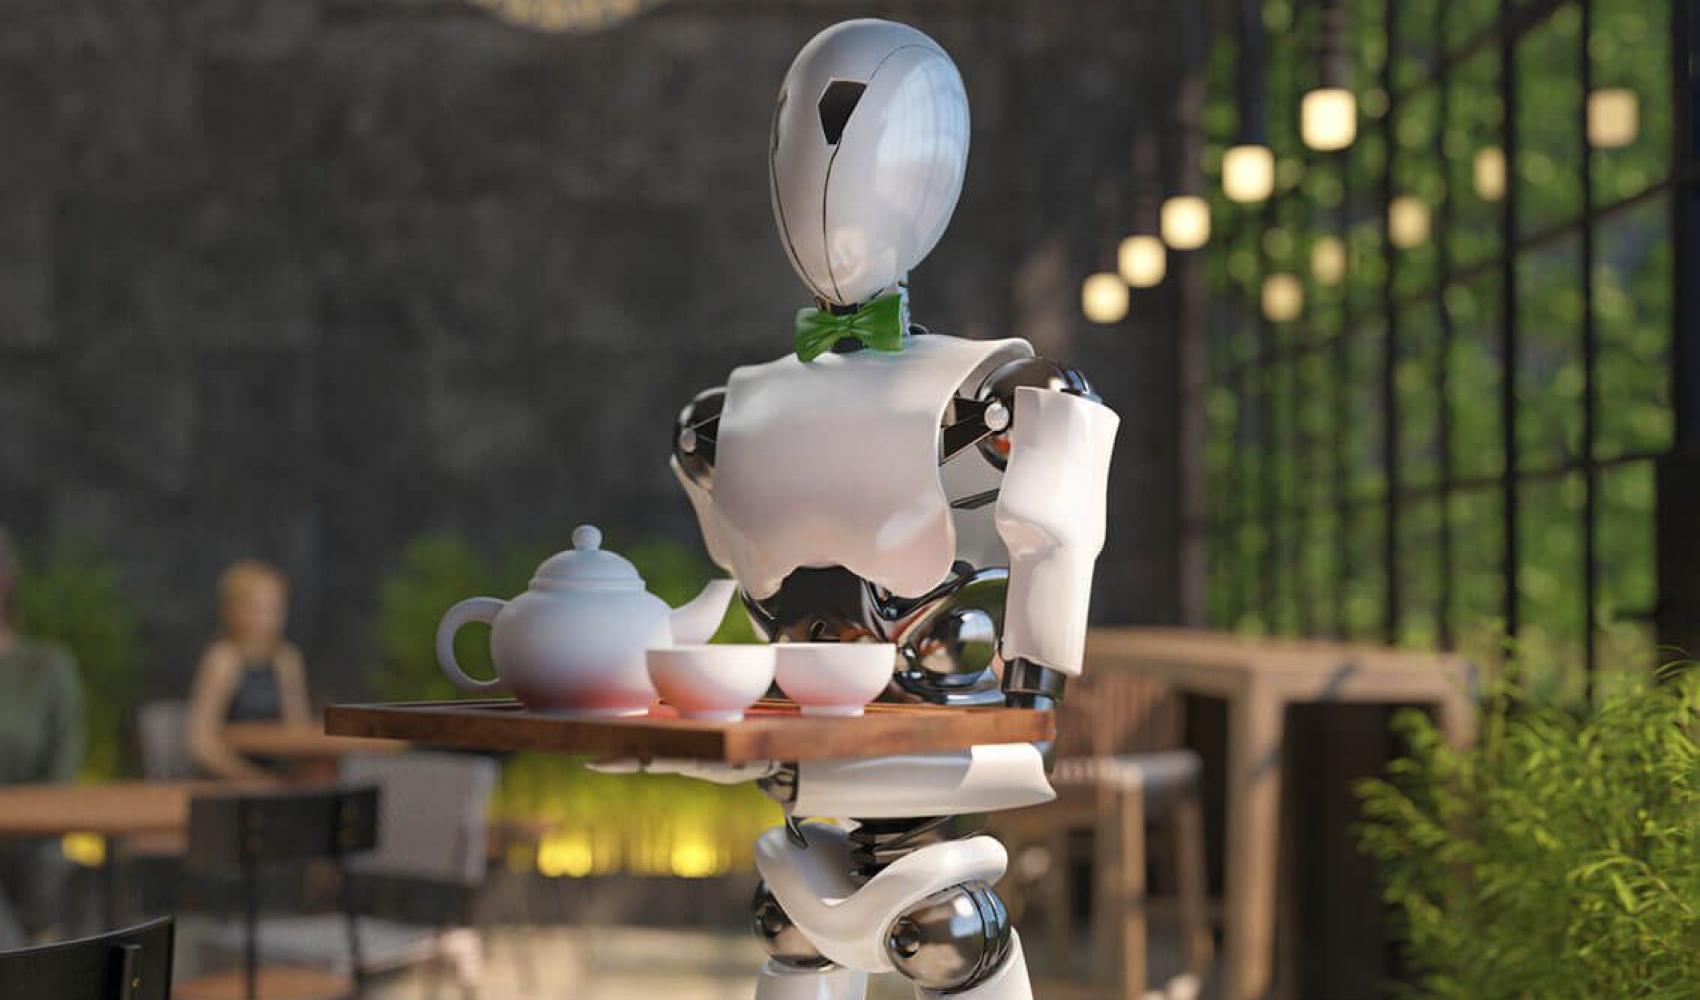 humanoid-robot-waiter-carries-tray-of-food–ecommerce-automation-drinks